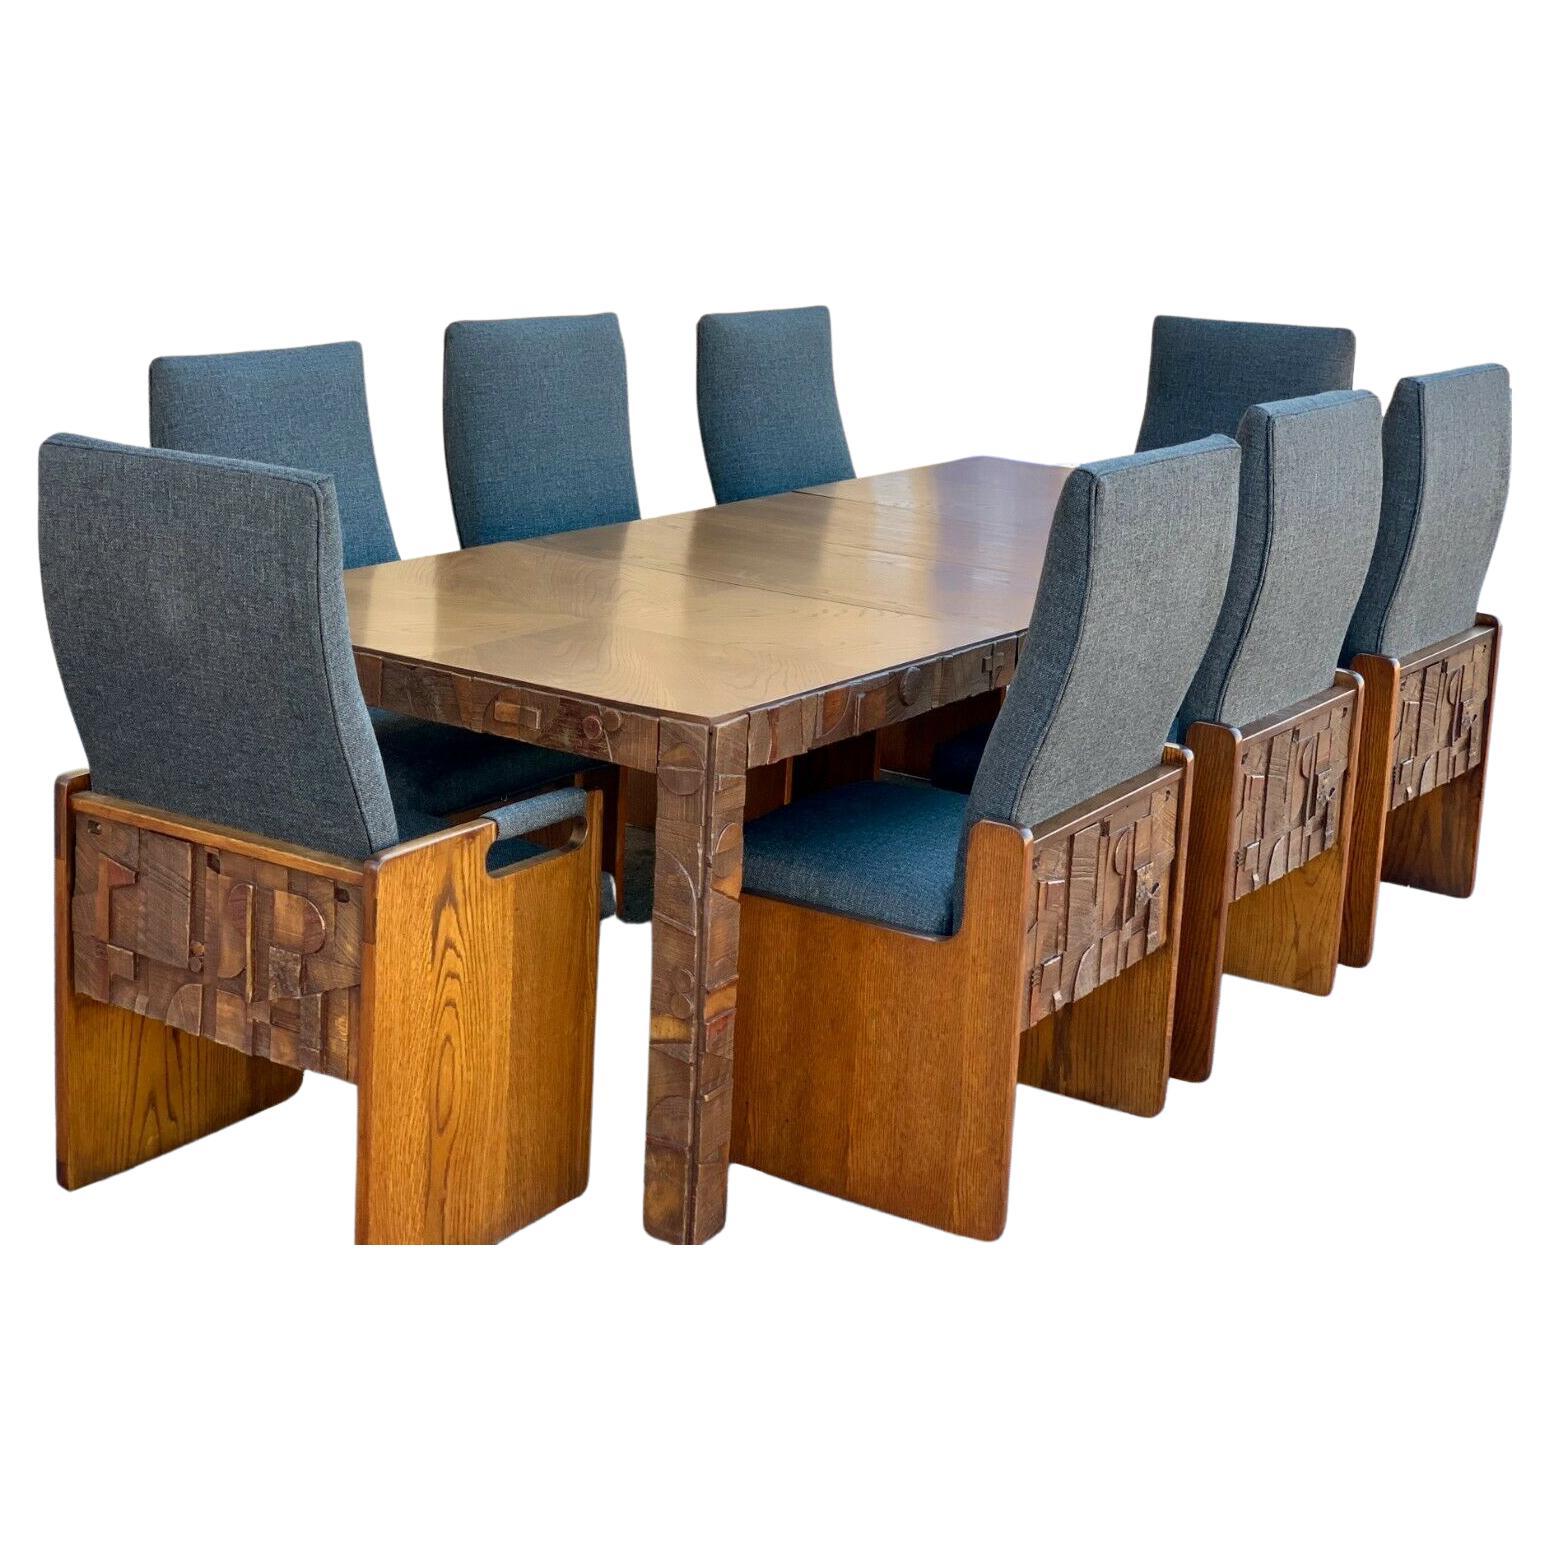 MCM Lane Mid Century Brutalist Dining Table and 8 chairs style of Paul Evans